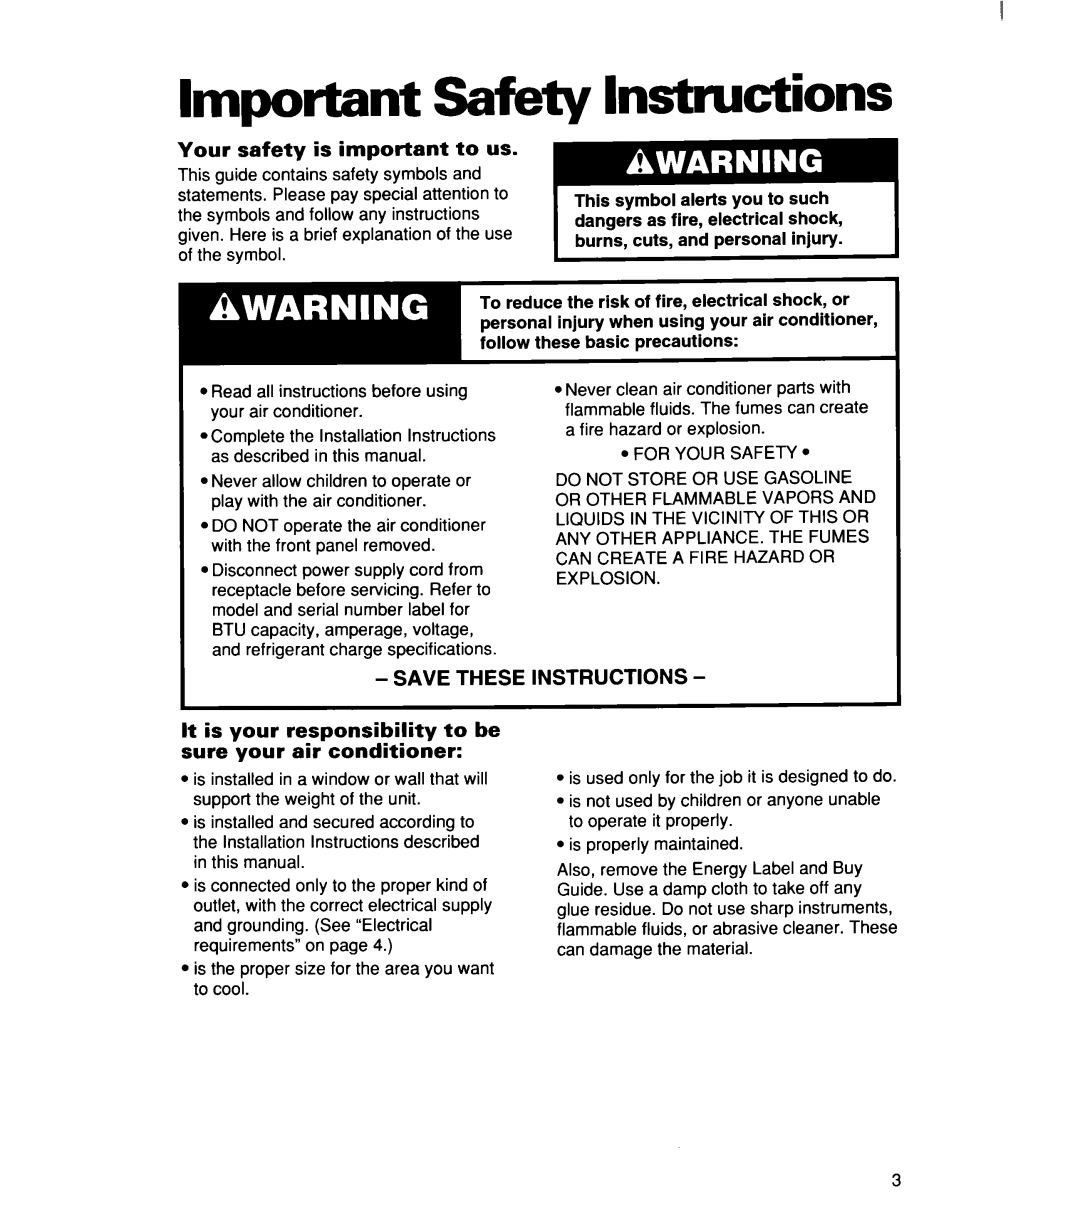 Whirlpool ACM 152XE0, ACM244XE0 Important Safbty Instructions, Your safety is important to us, Save These Instructions 